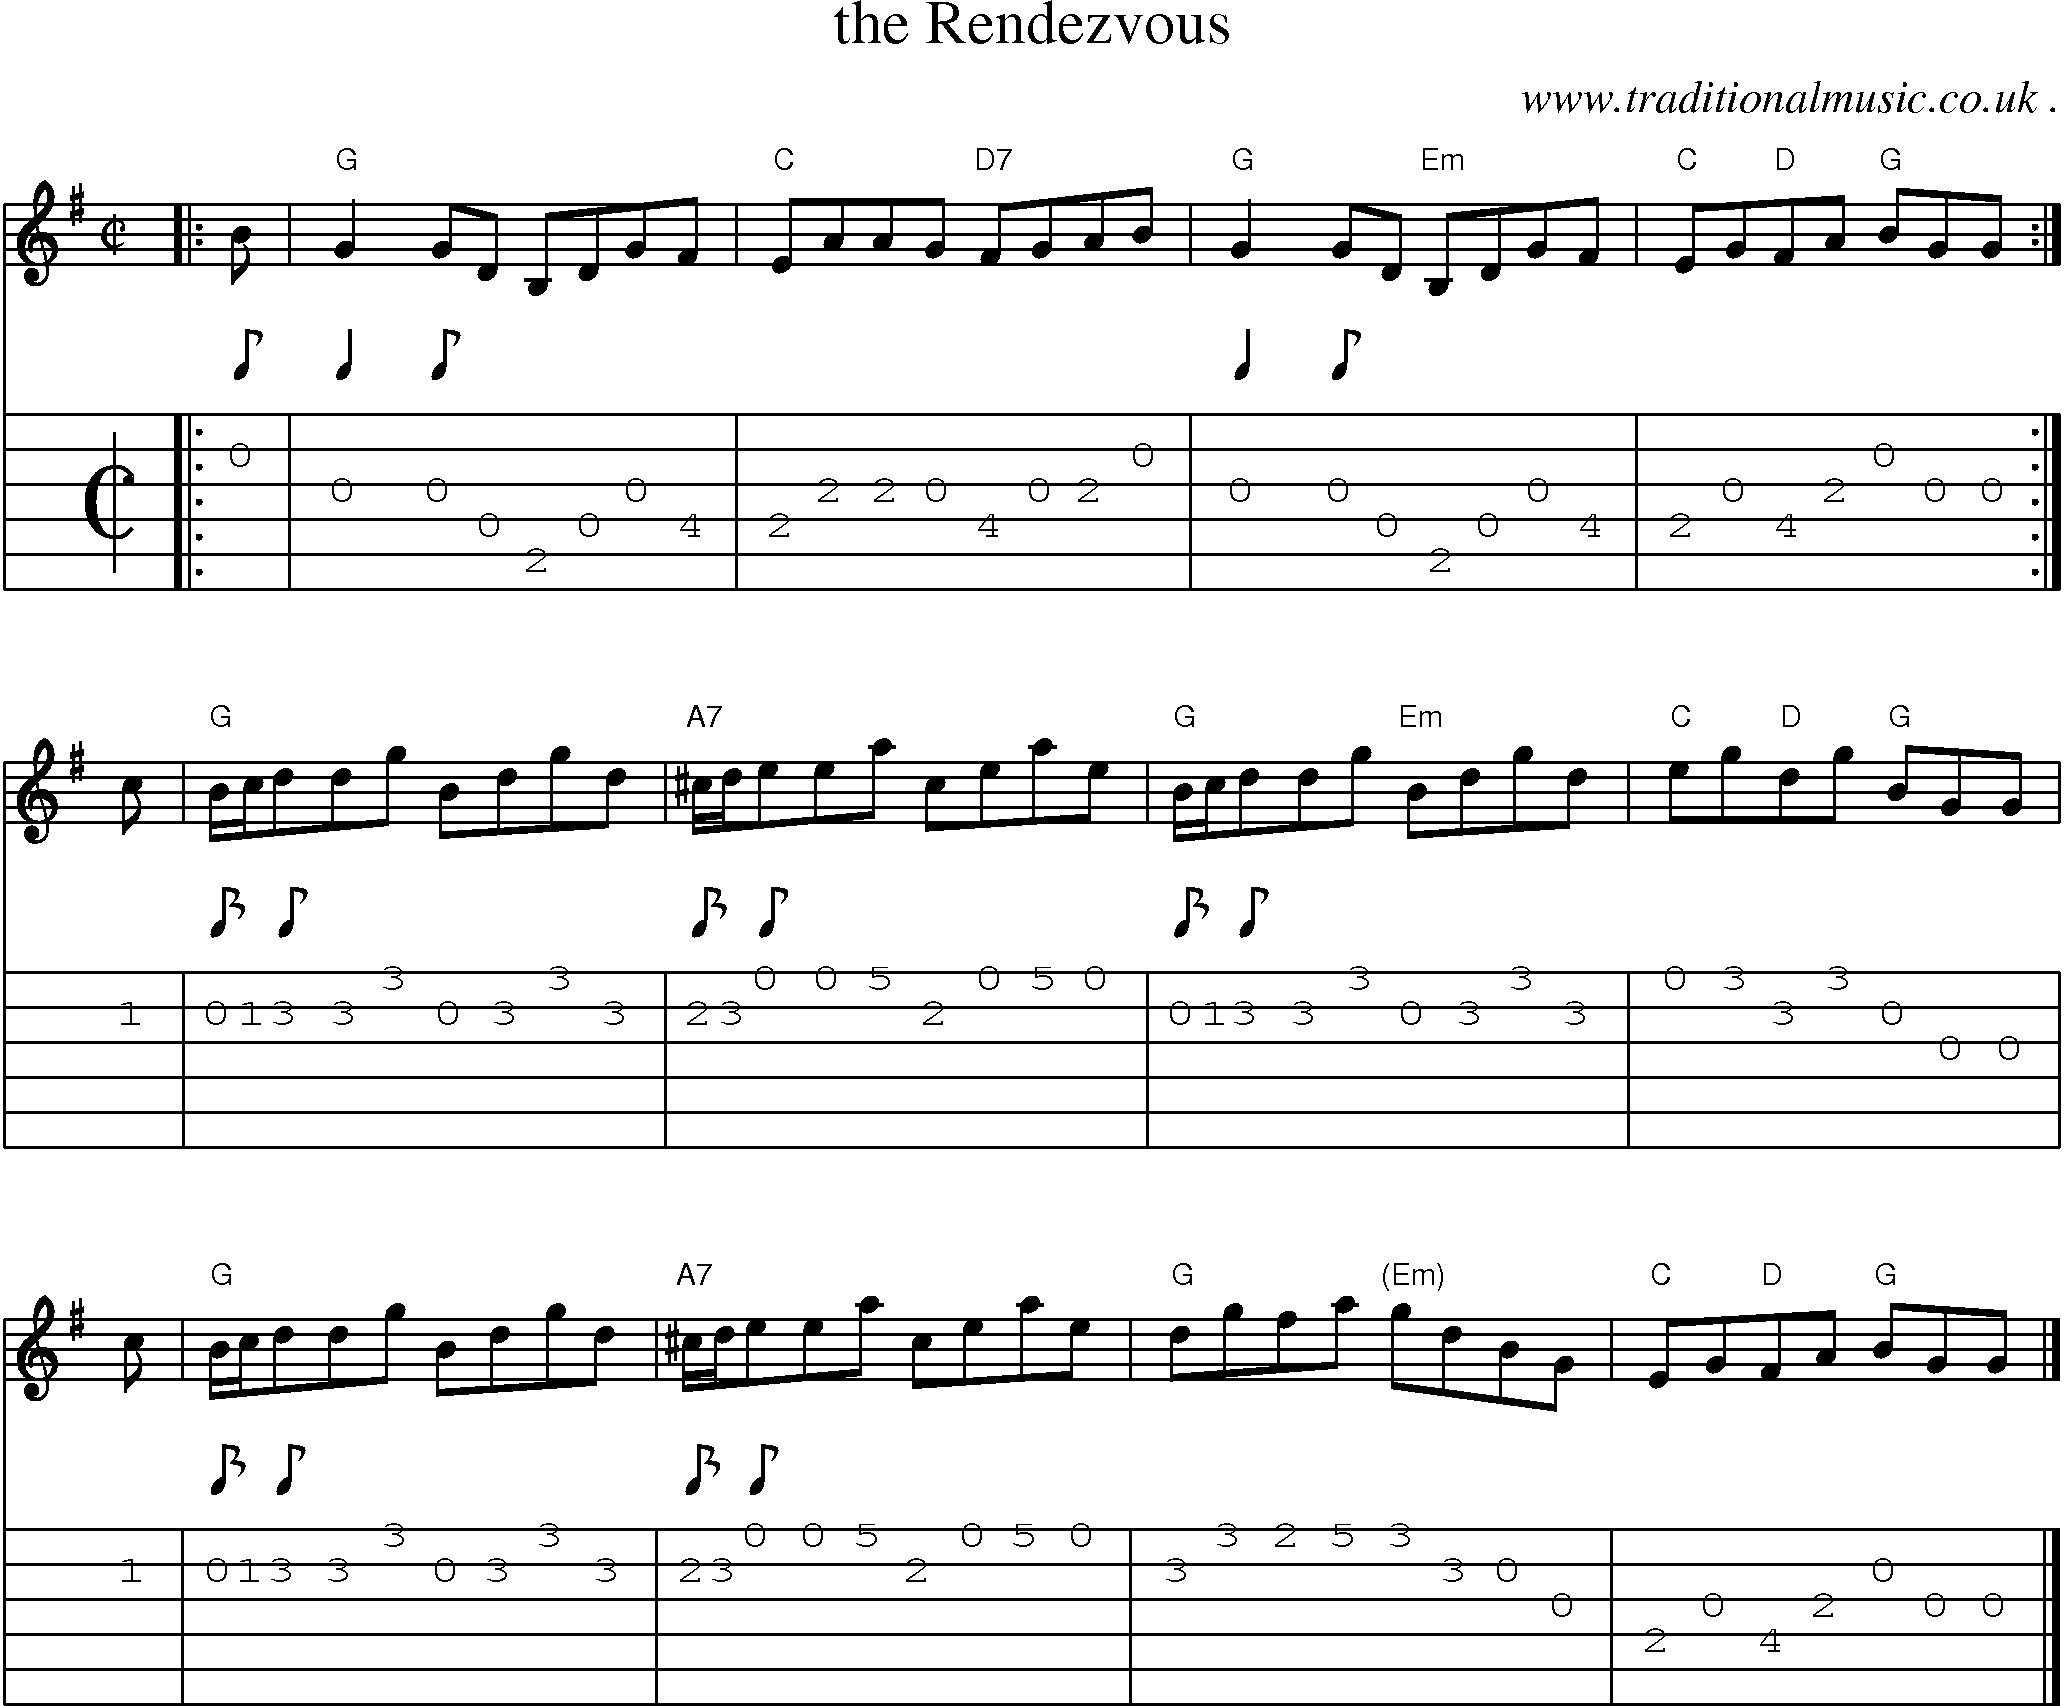 Sheet-music  score, Chords and Guitar Tabs for The Rendezvous